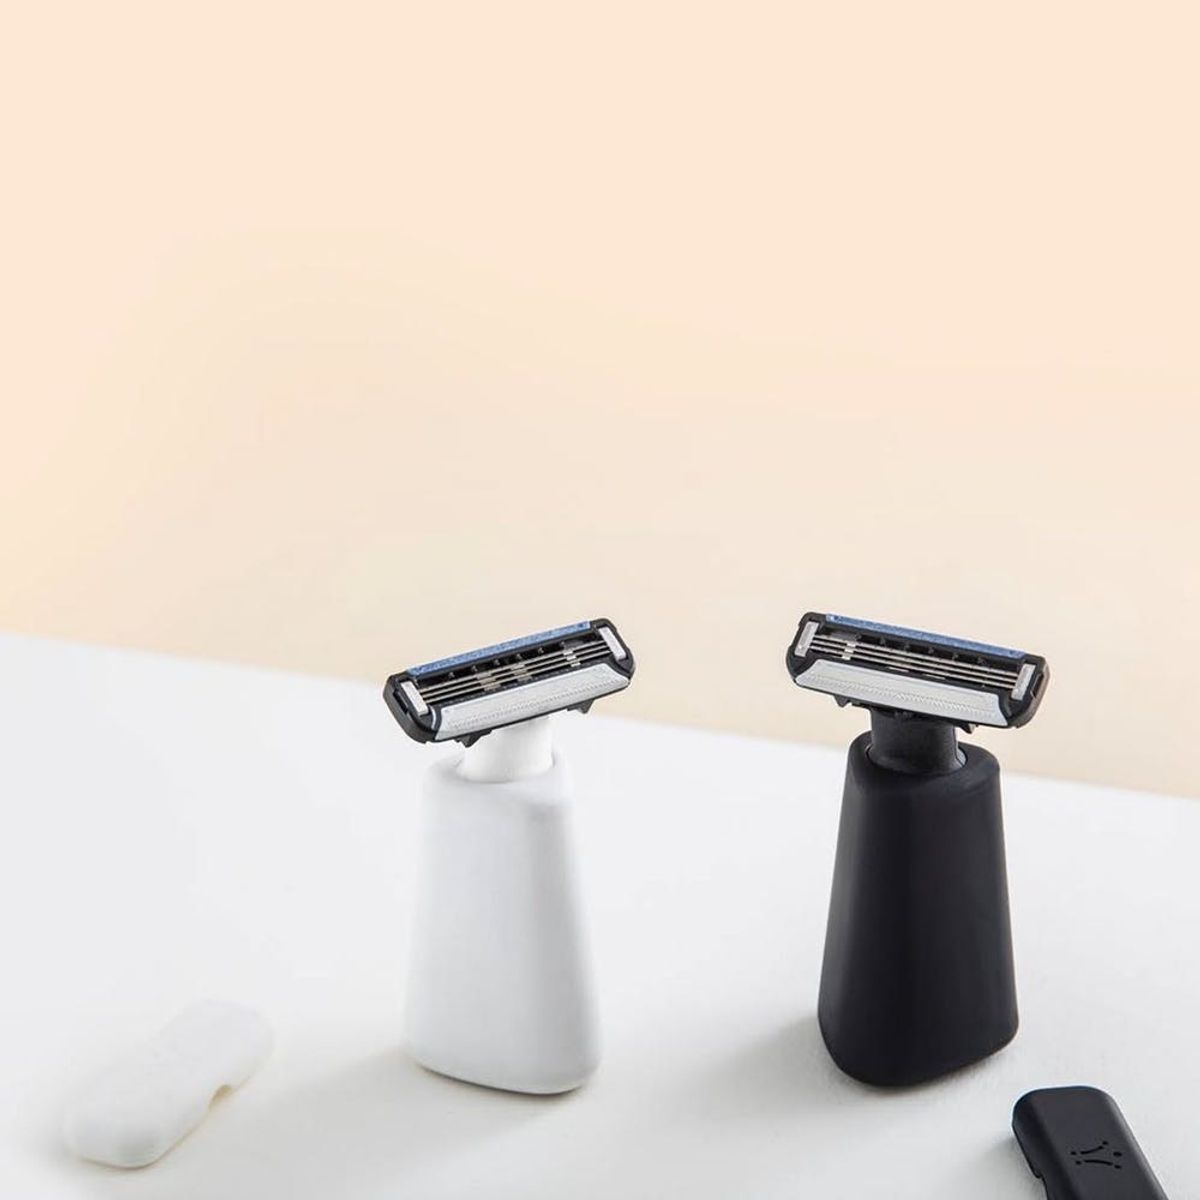 This Sleek New Razor Will Change the Way You Shave